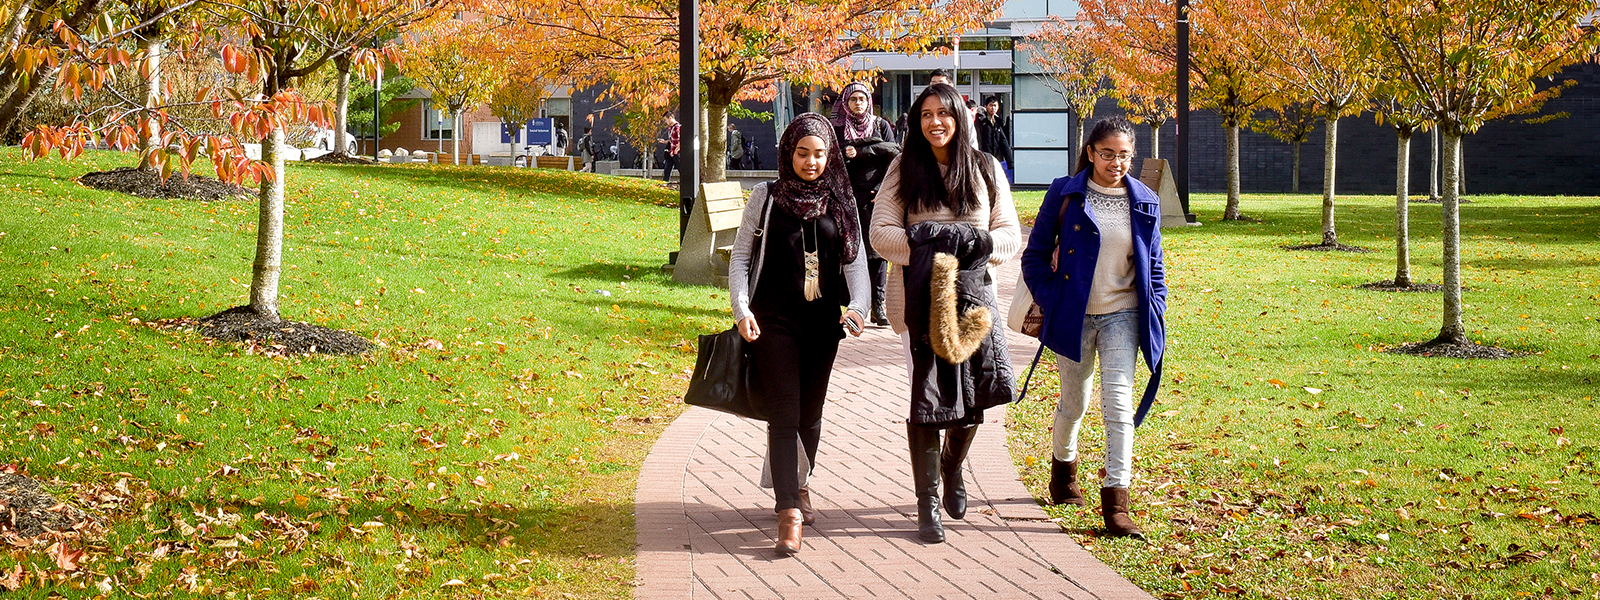 U of T Scarborough students walking outside on campus in the fall